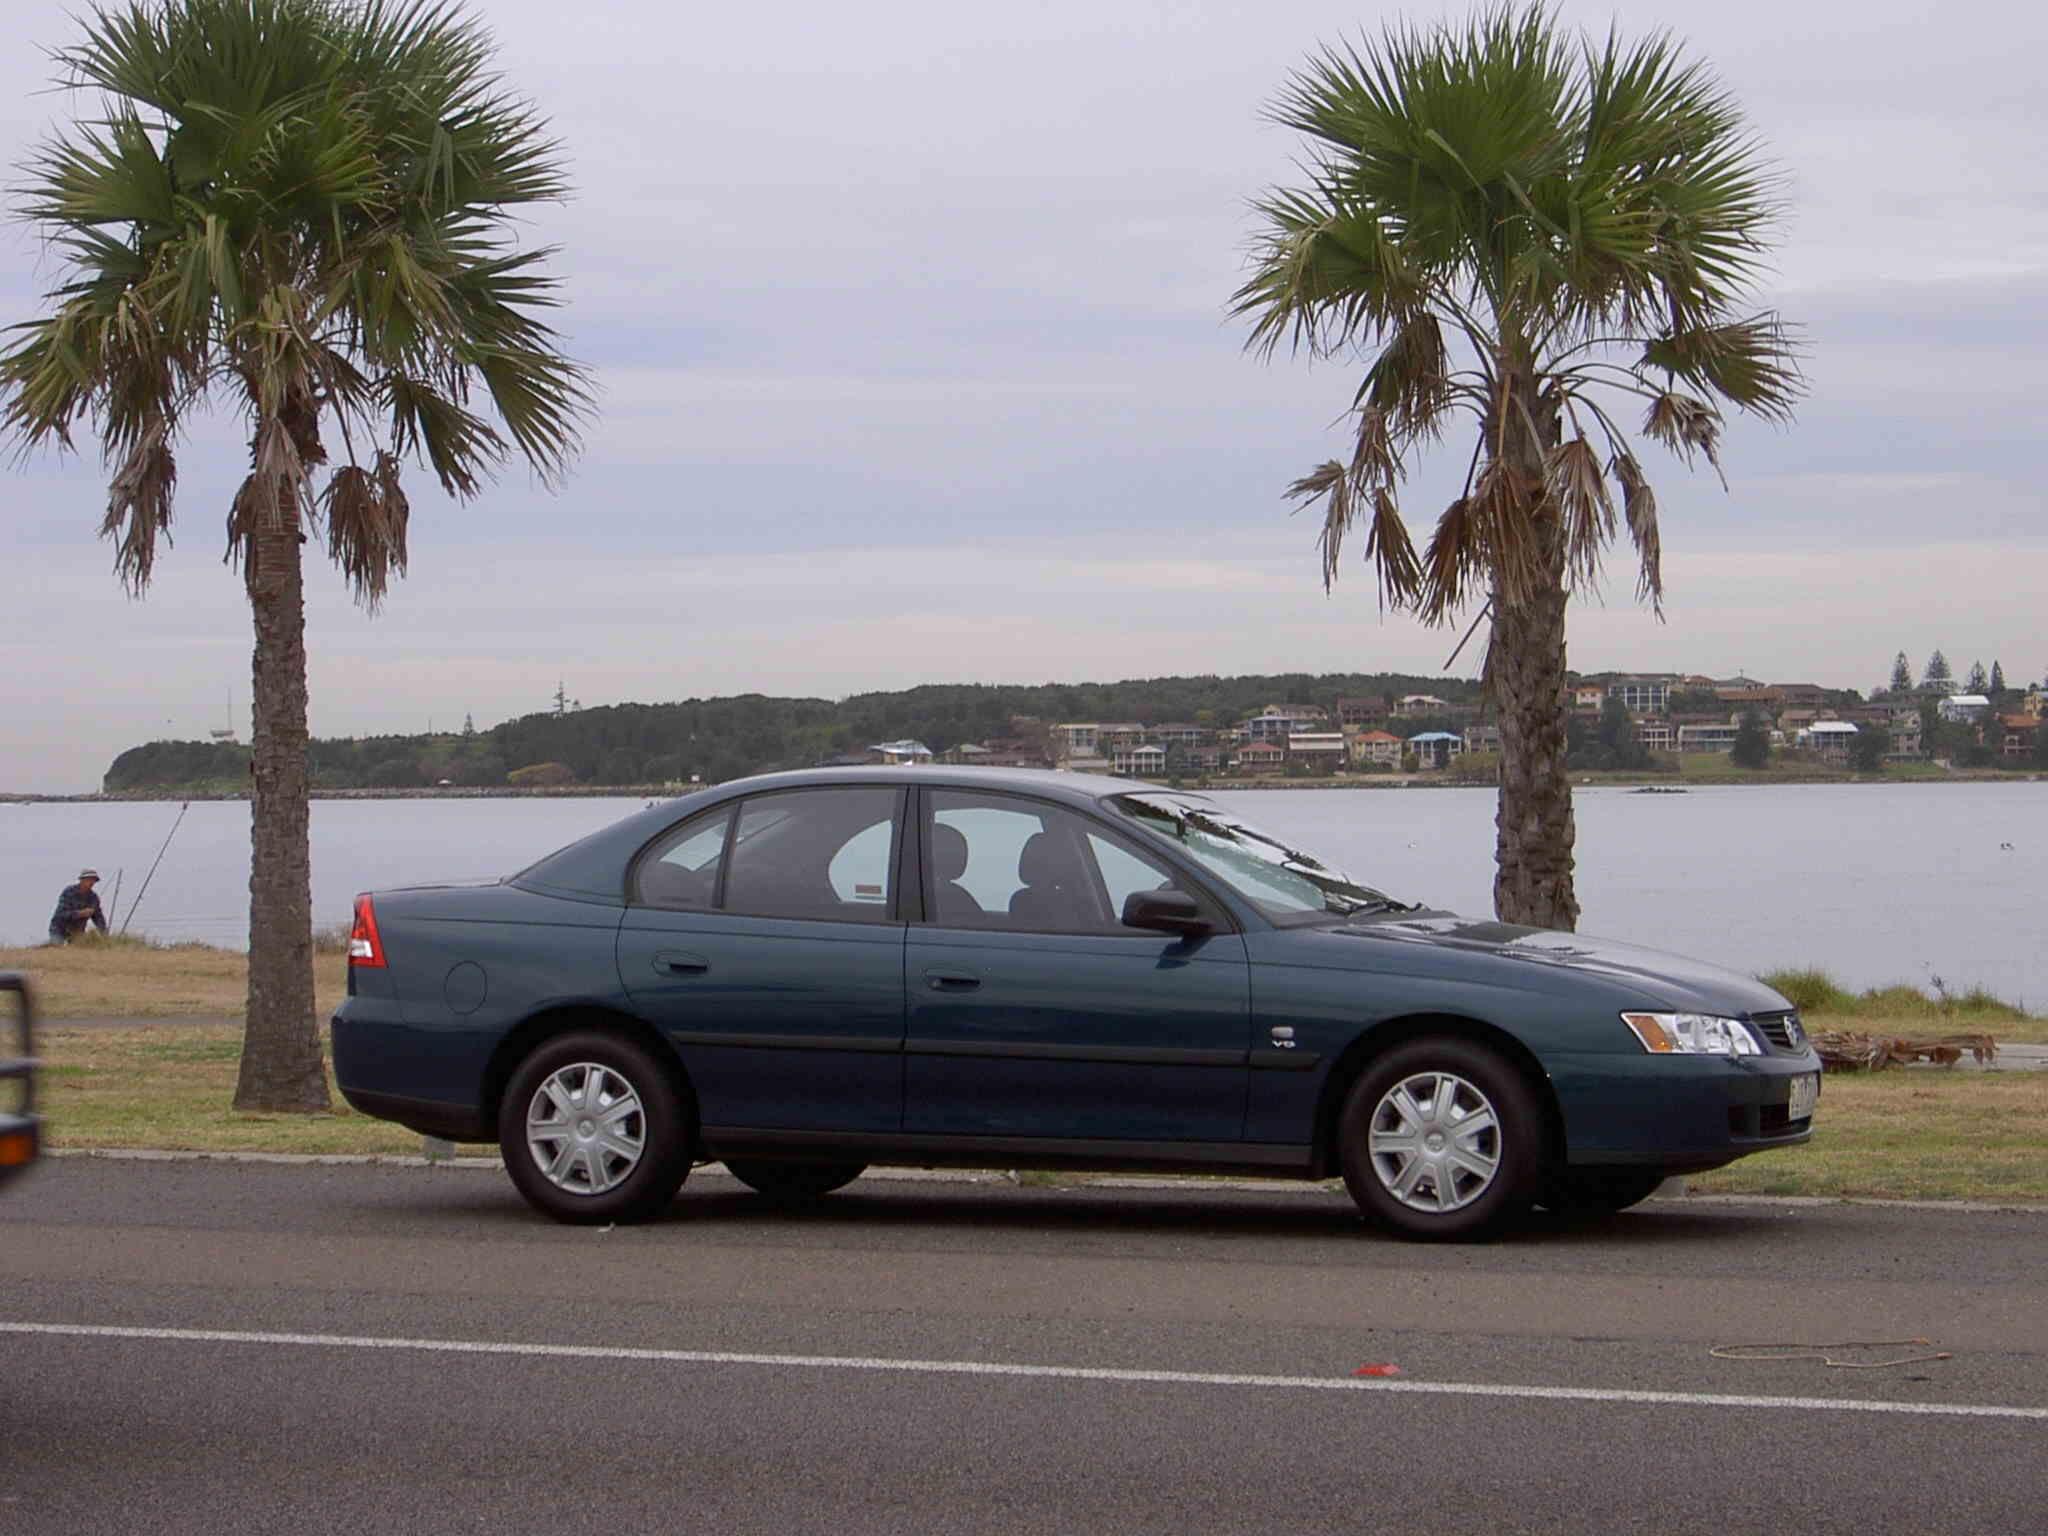 2004 Holden Commodore Executive - VYII (copyright image)